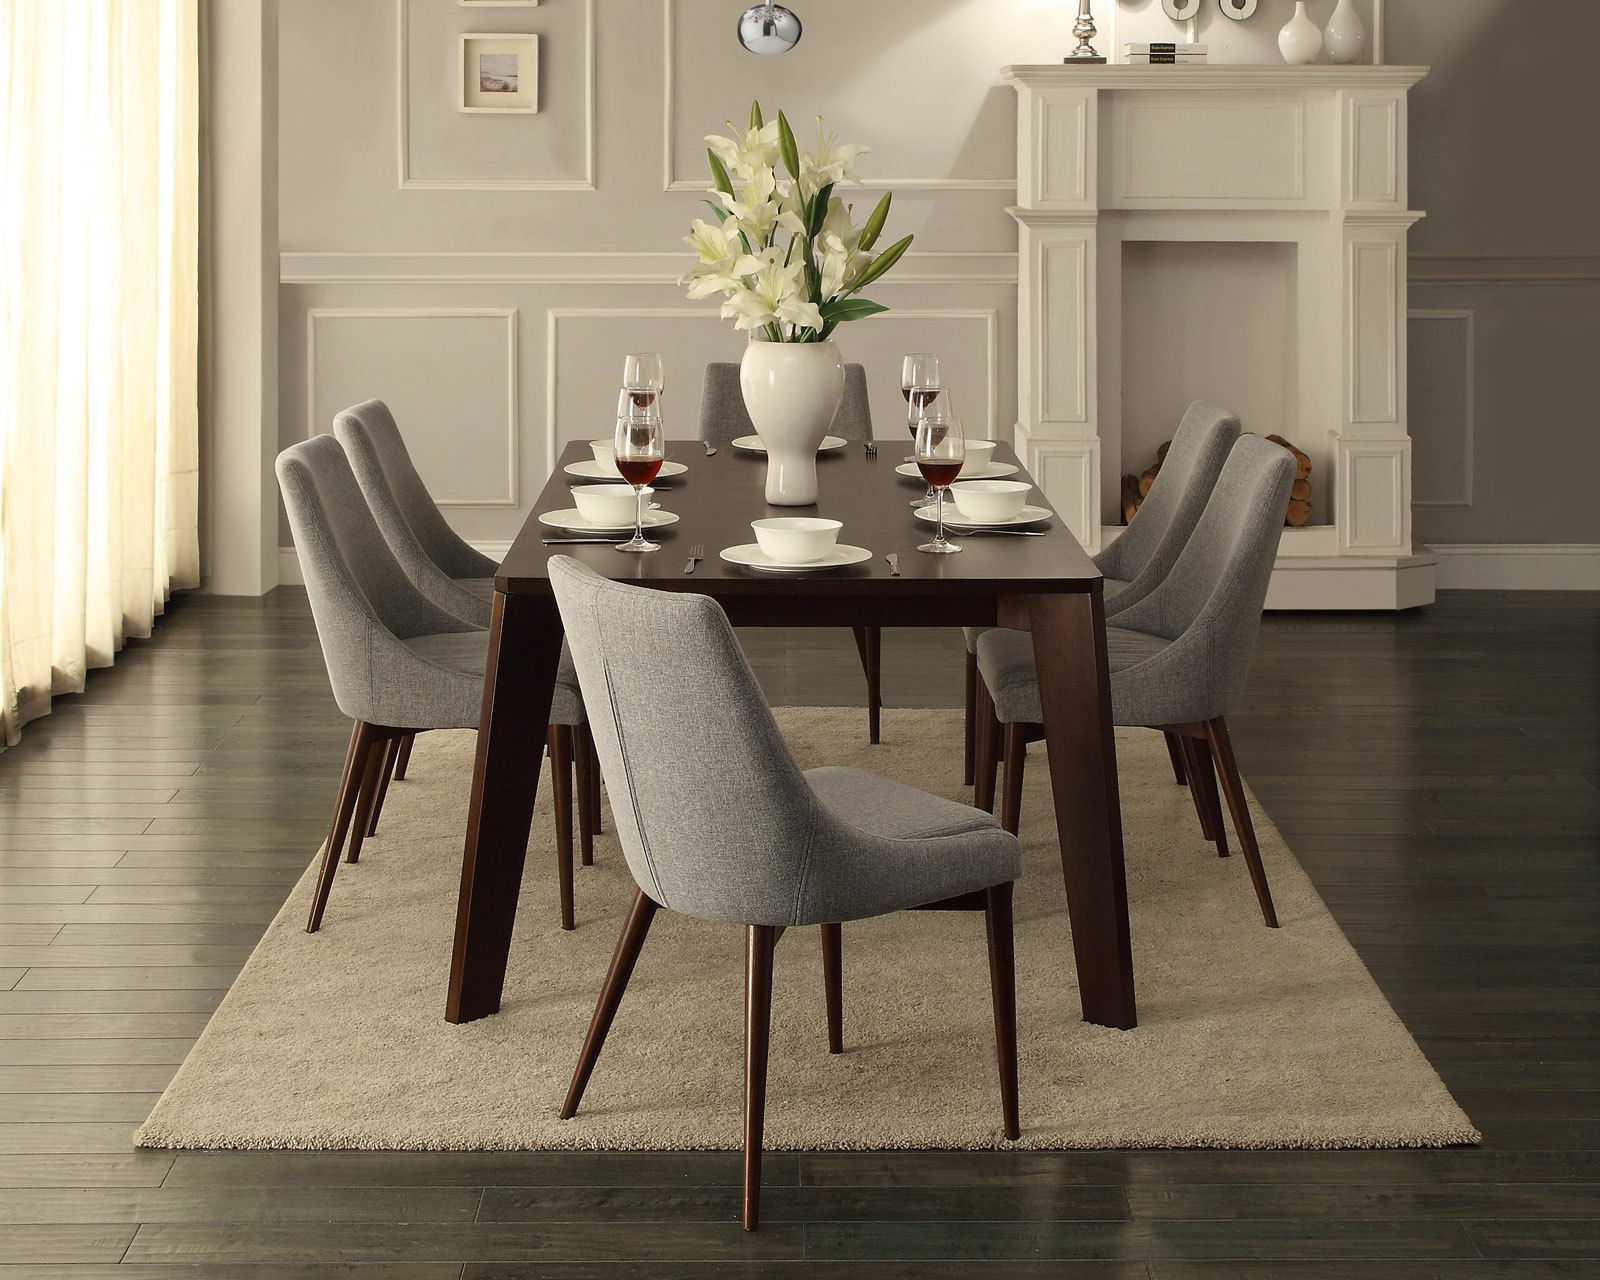 Rectangular Dining Room Table And Chairs Seat 8